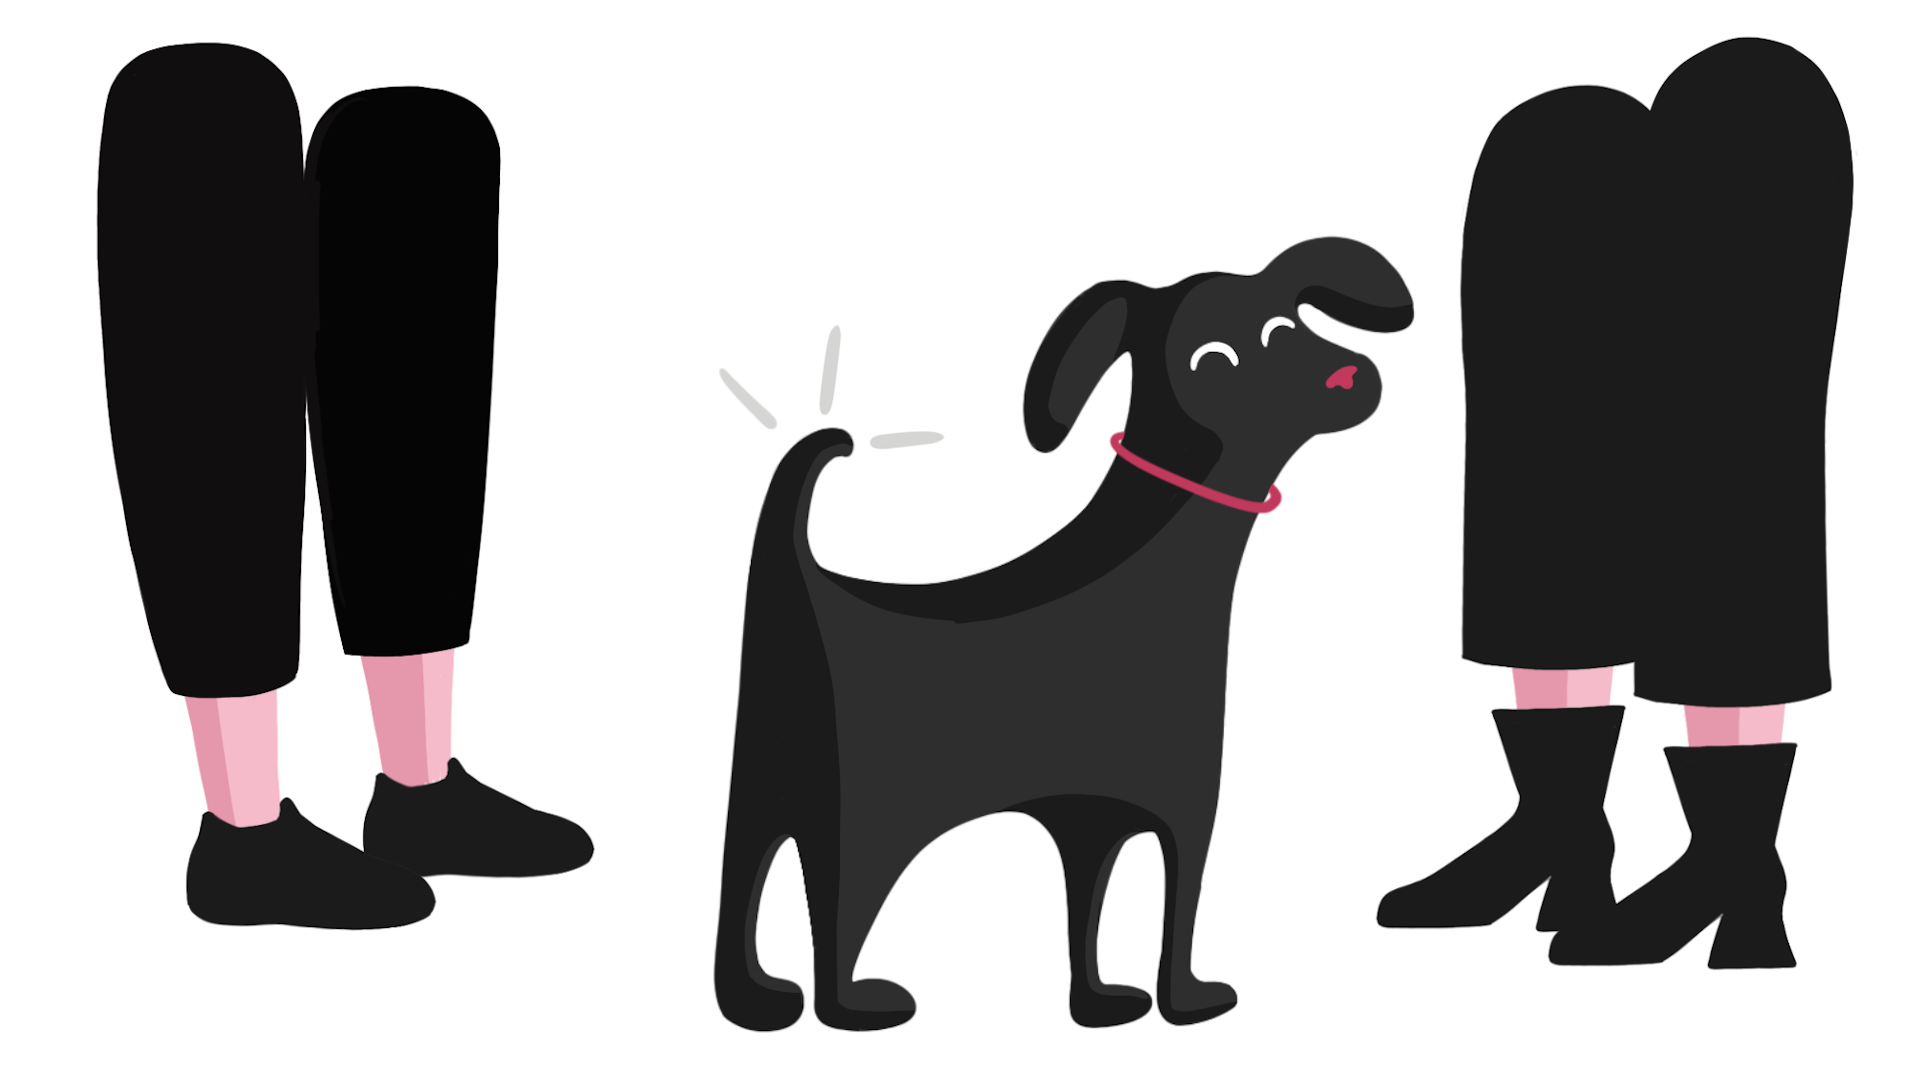 Illustration of black dog wearing a red collar standing between two pairs of human legs